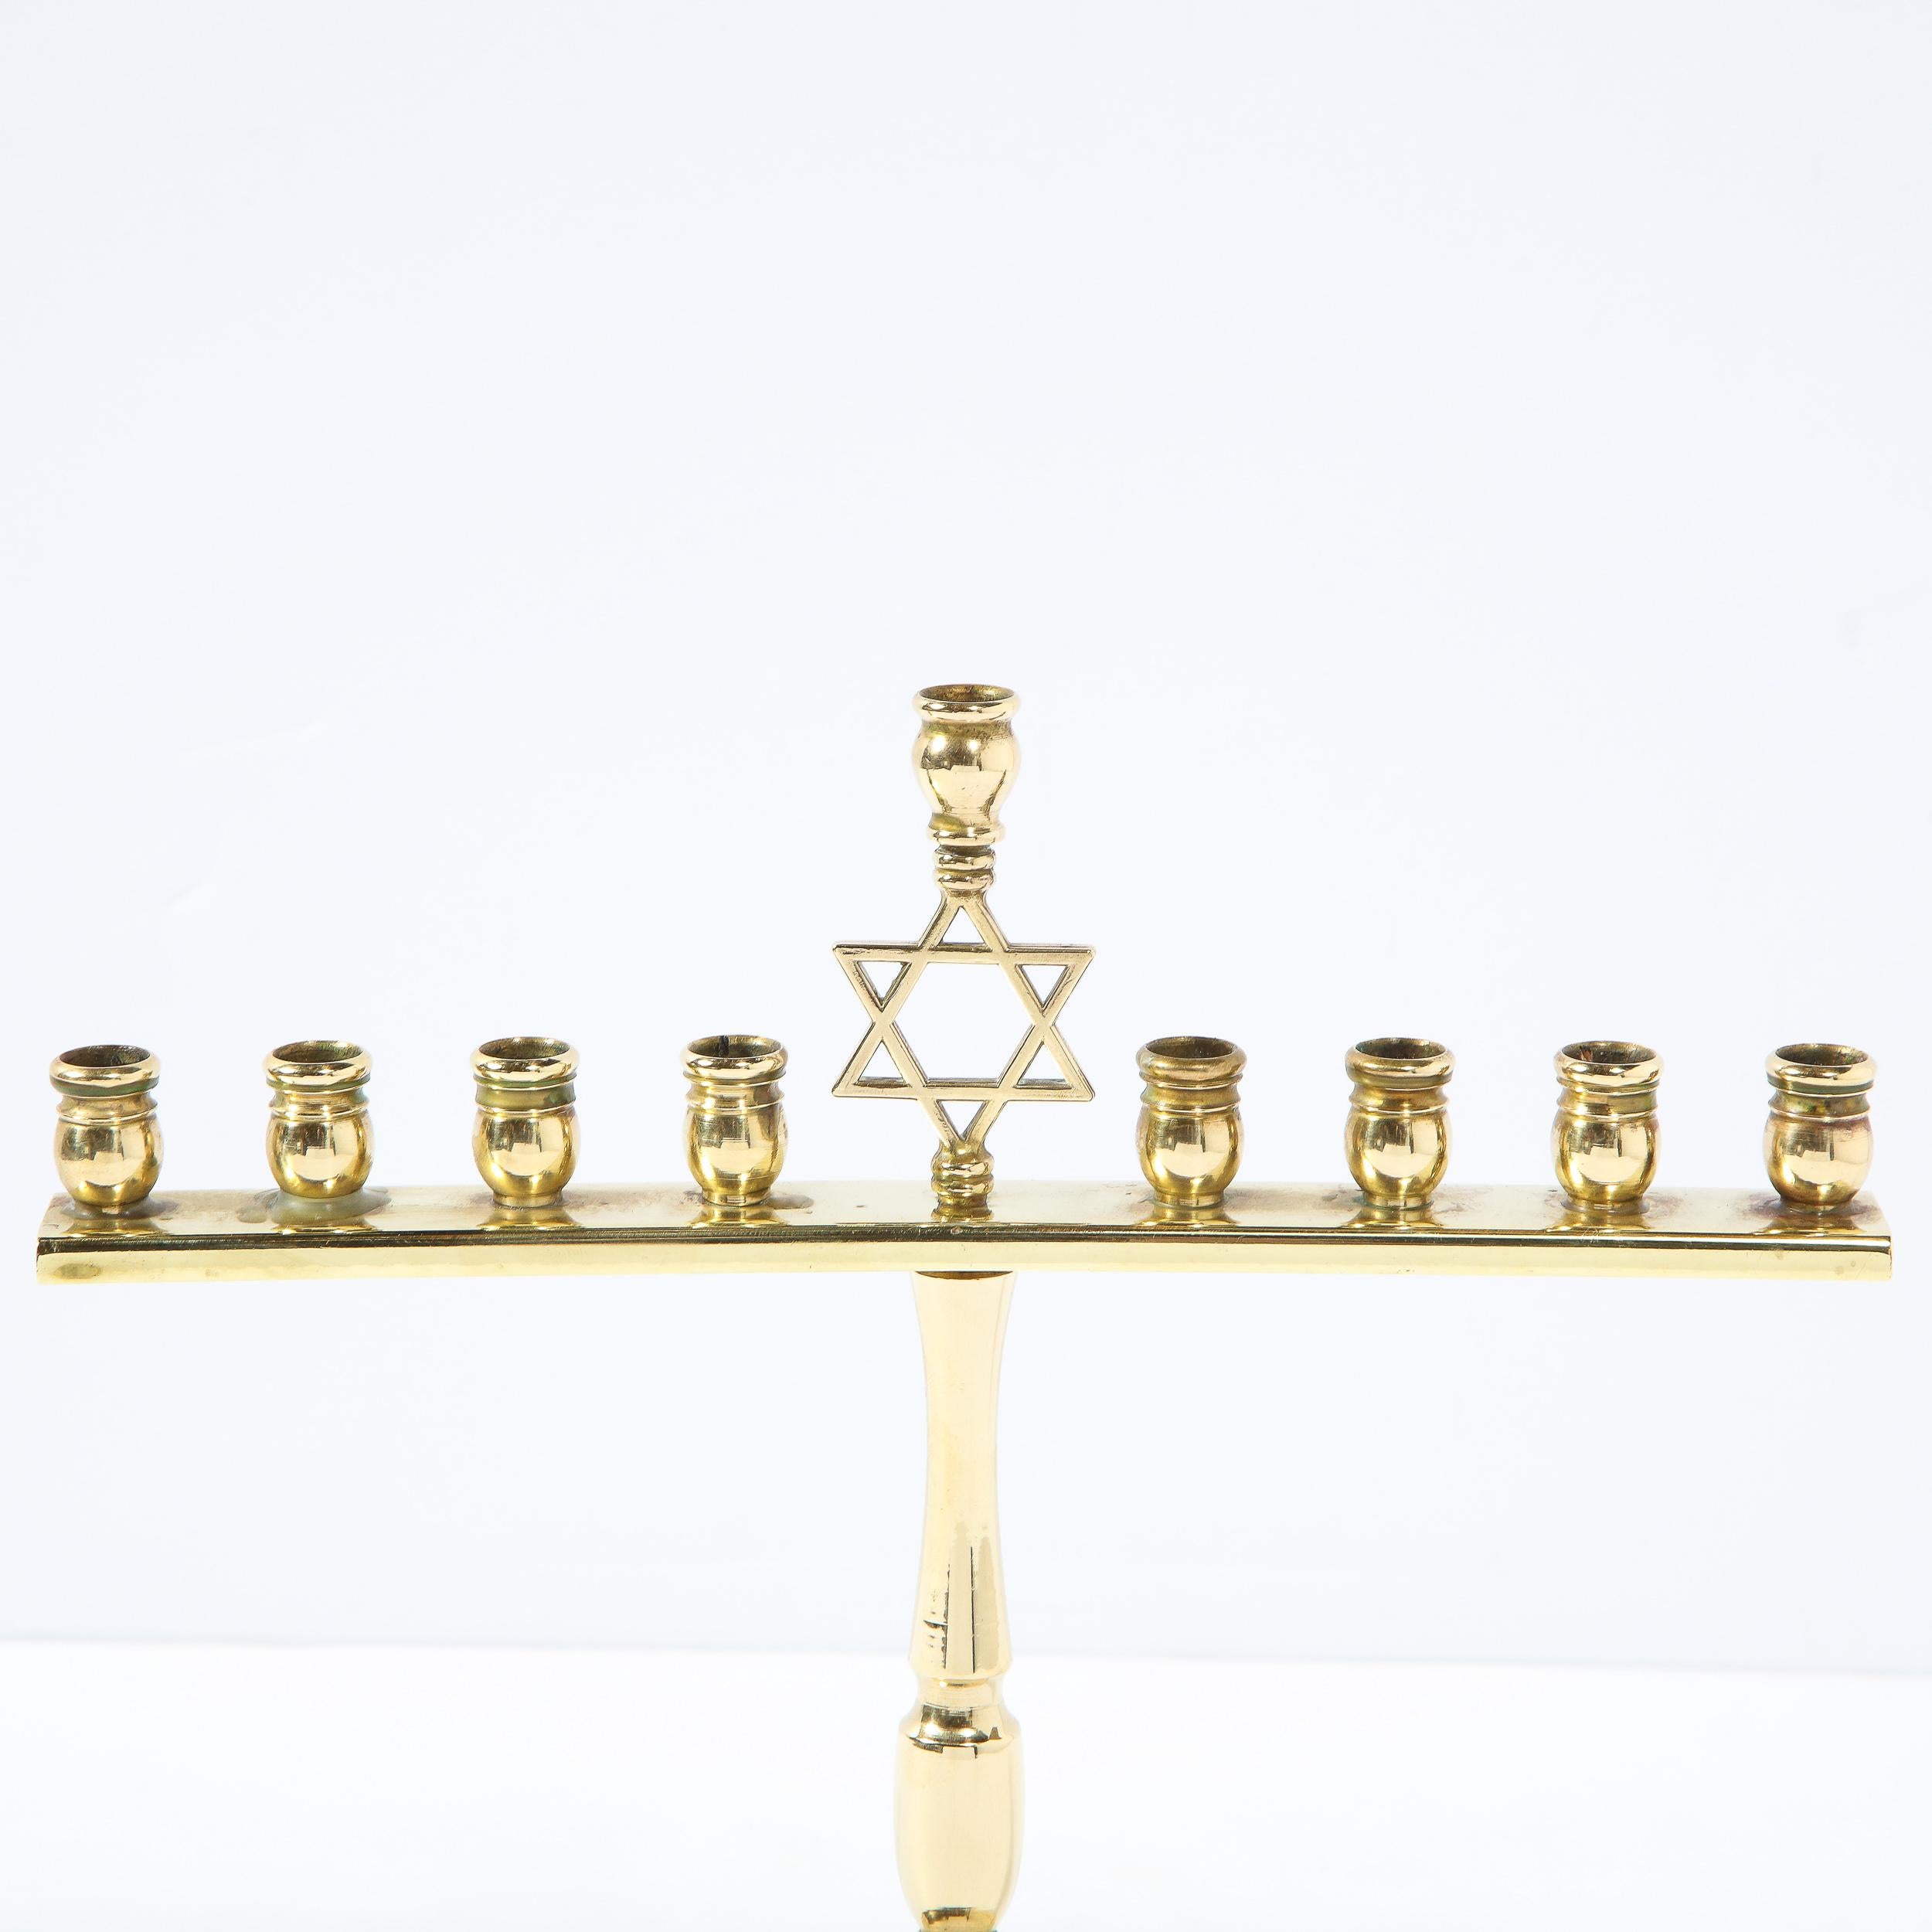 This heavy brass Art Deco menorah features a streamlined design of a stylized balustrade form support on a tiered circular form base . It features 9 candle holders in the form of styled oil vessels ,the central one being supported by a star of